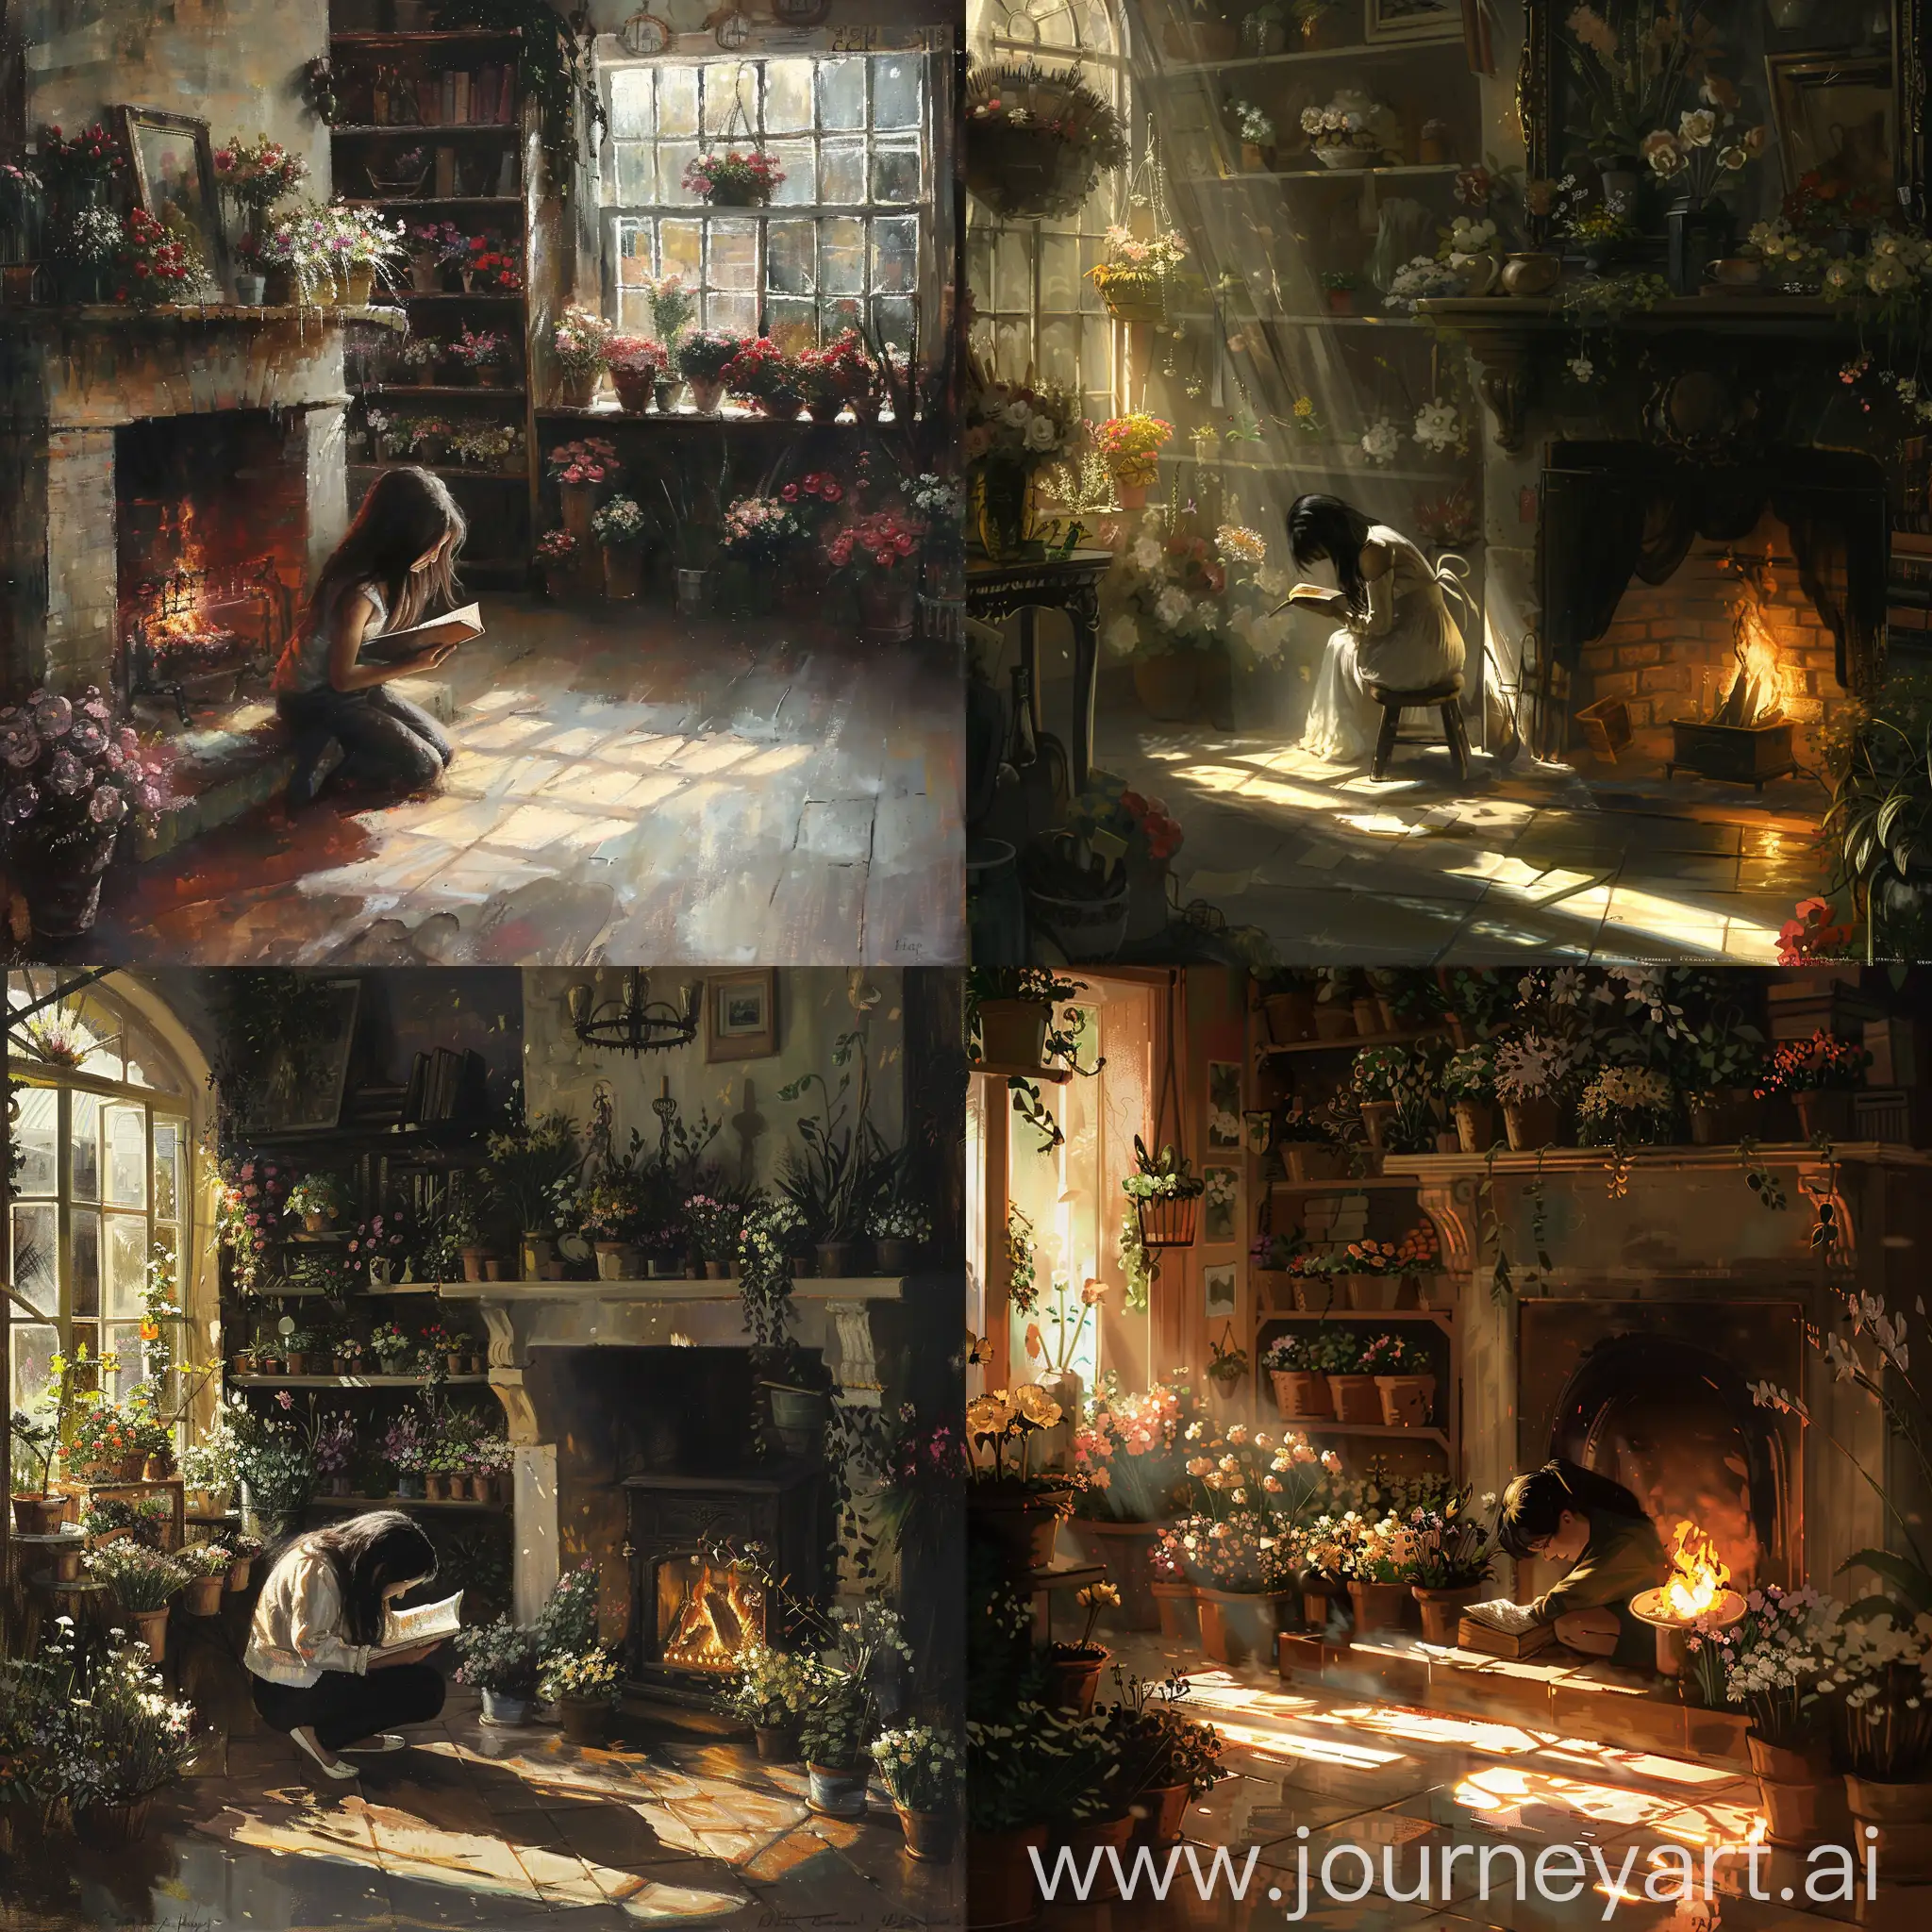 Artistic-Girl-Reading-by-Fireplace-in-Flower-Shop